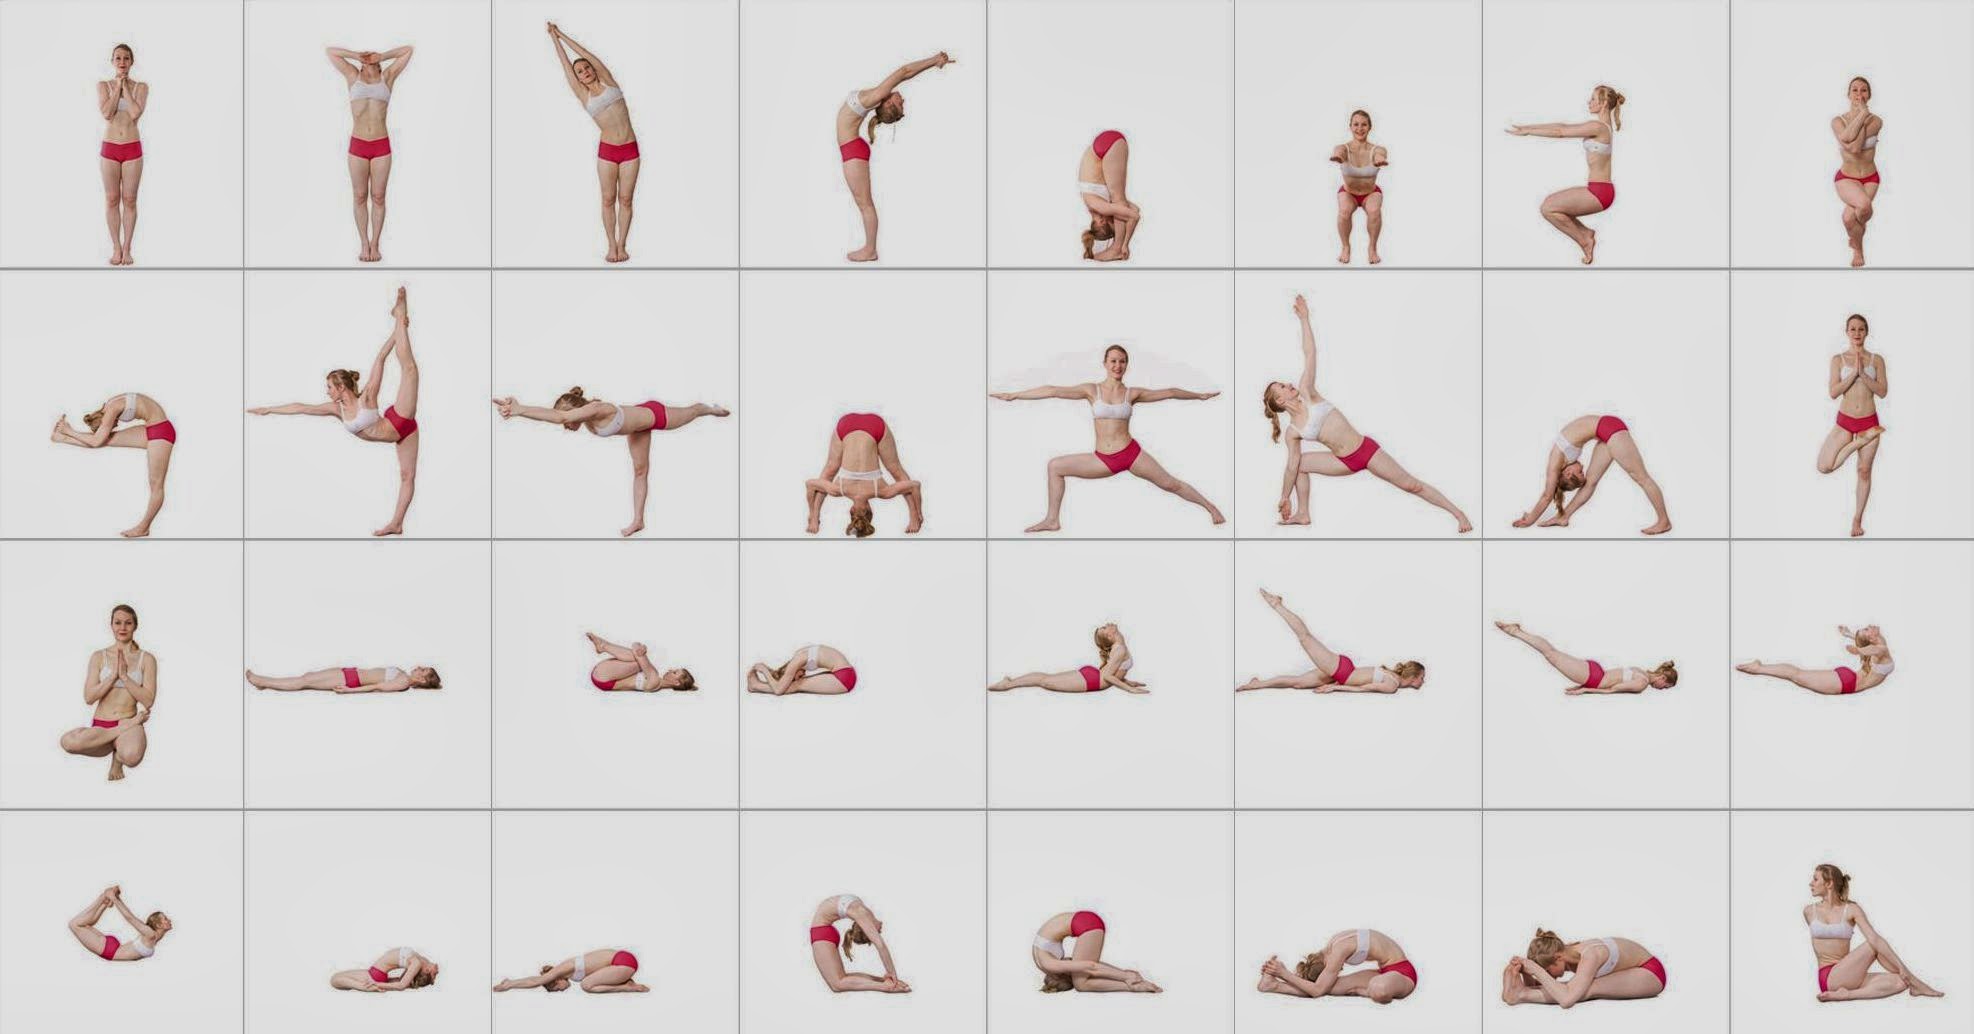 Any health effects from practicing Bikram yoga? 6